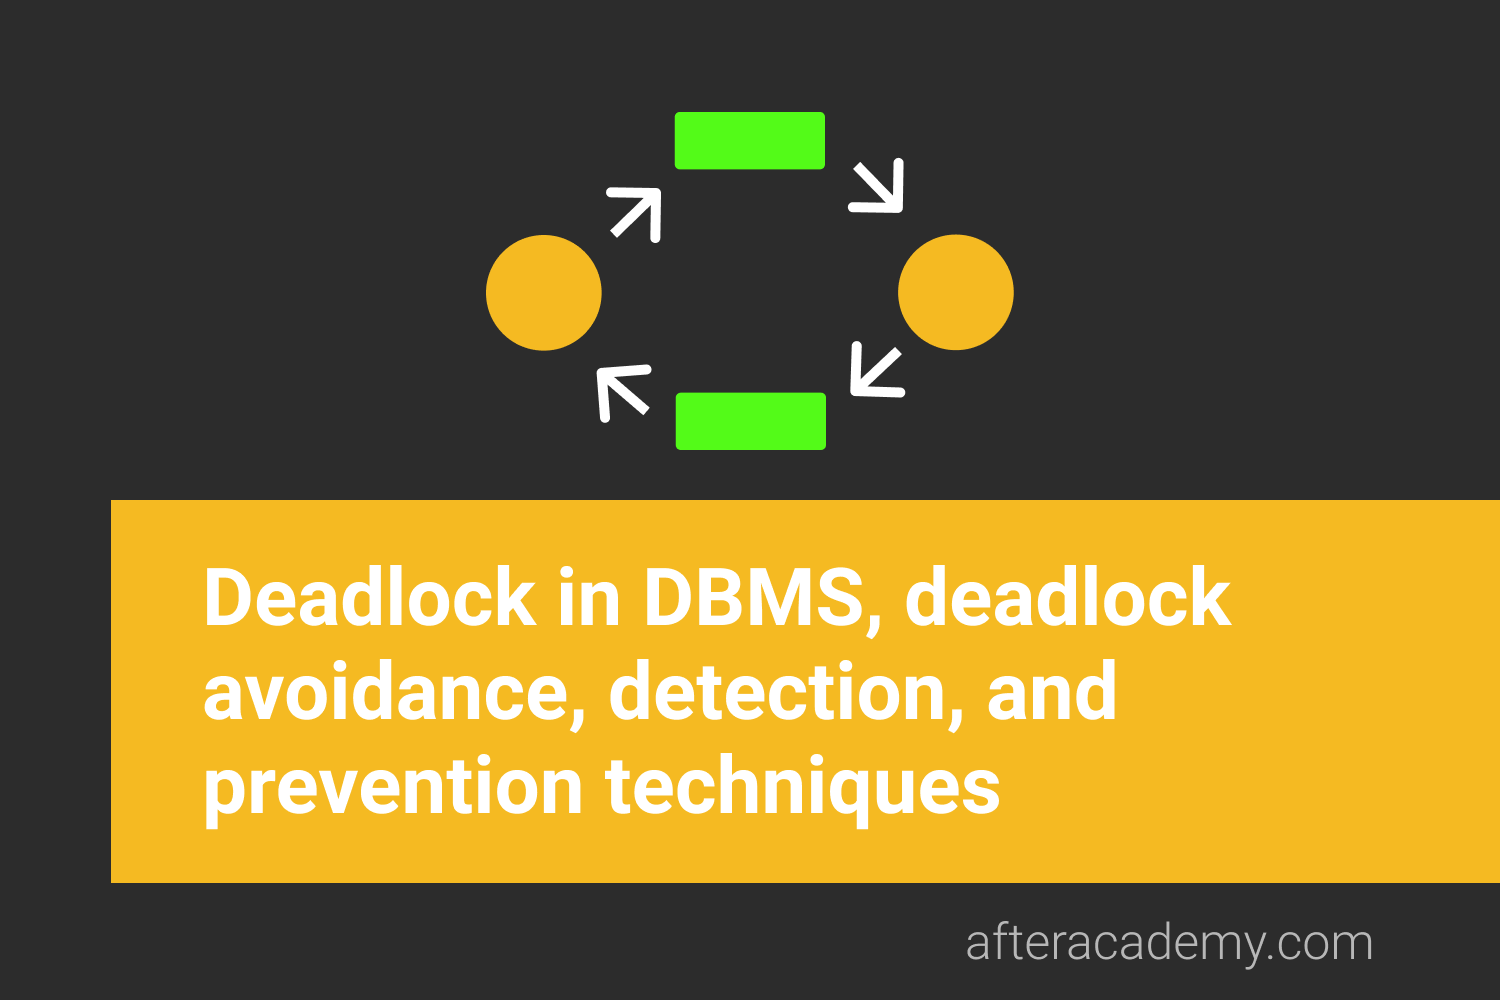 What is a Deadlock in DBMS and what are the deadlock avoidance, detection, and prevention techniques?